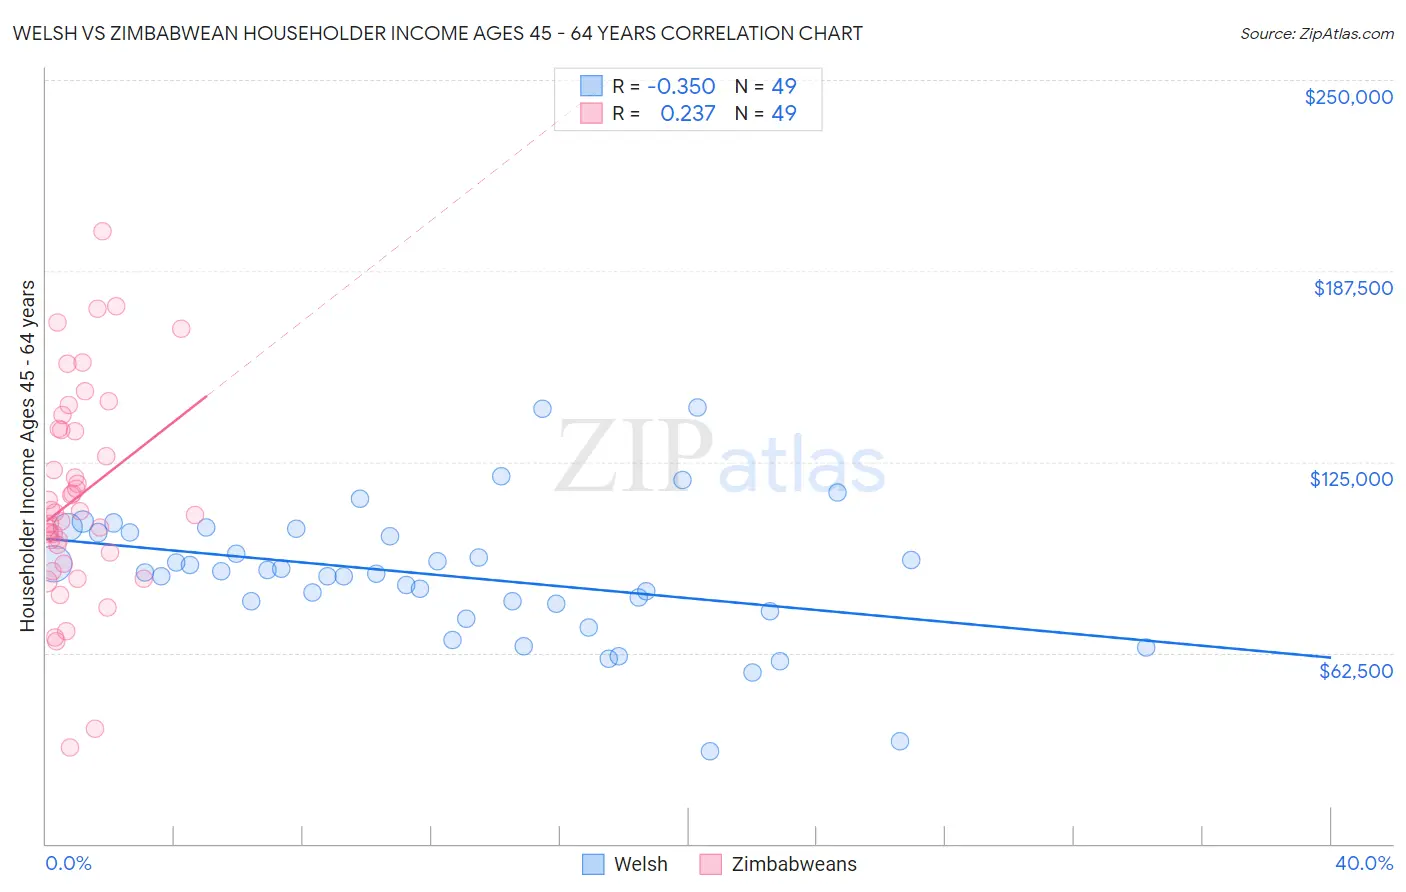 Welsh vs Zimbabwean Householder Income Ages 45 - 64 years